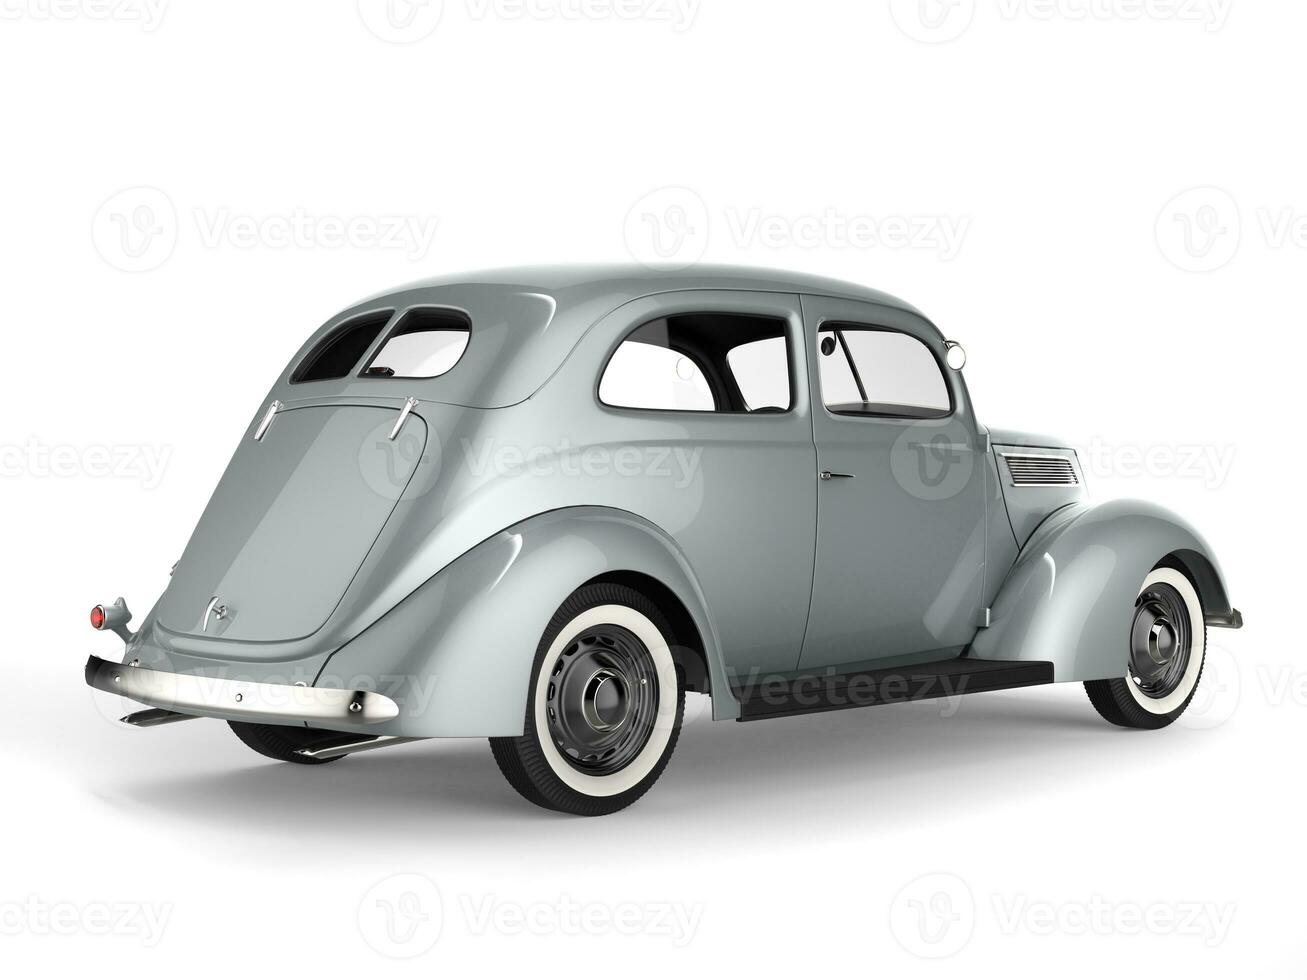 Silver old timer vintage car with white wall tires photo